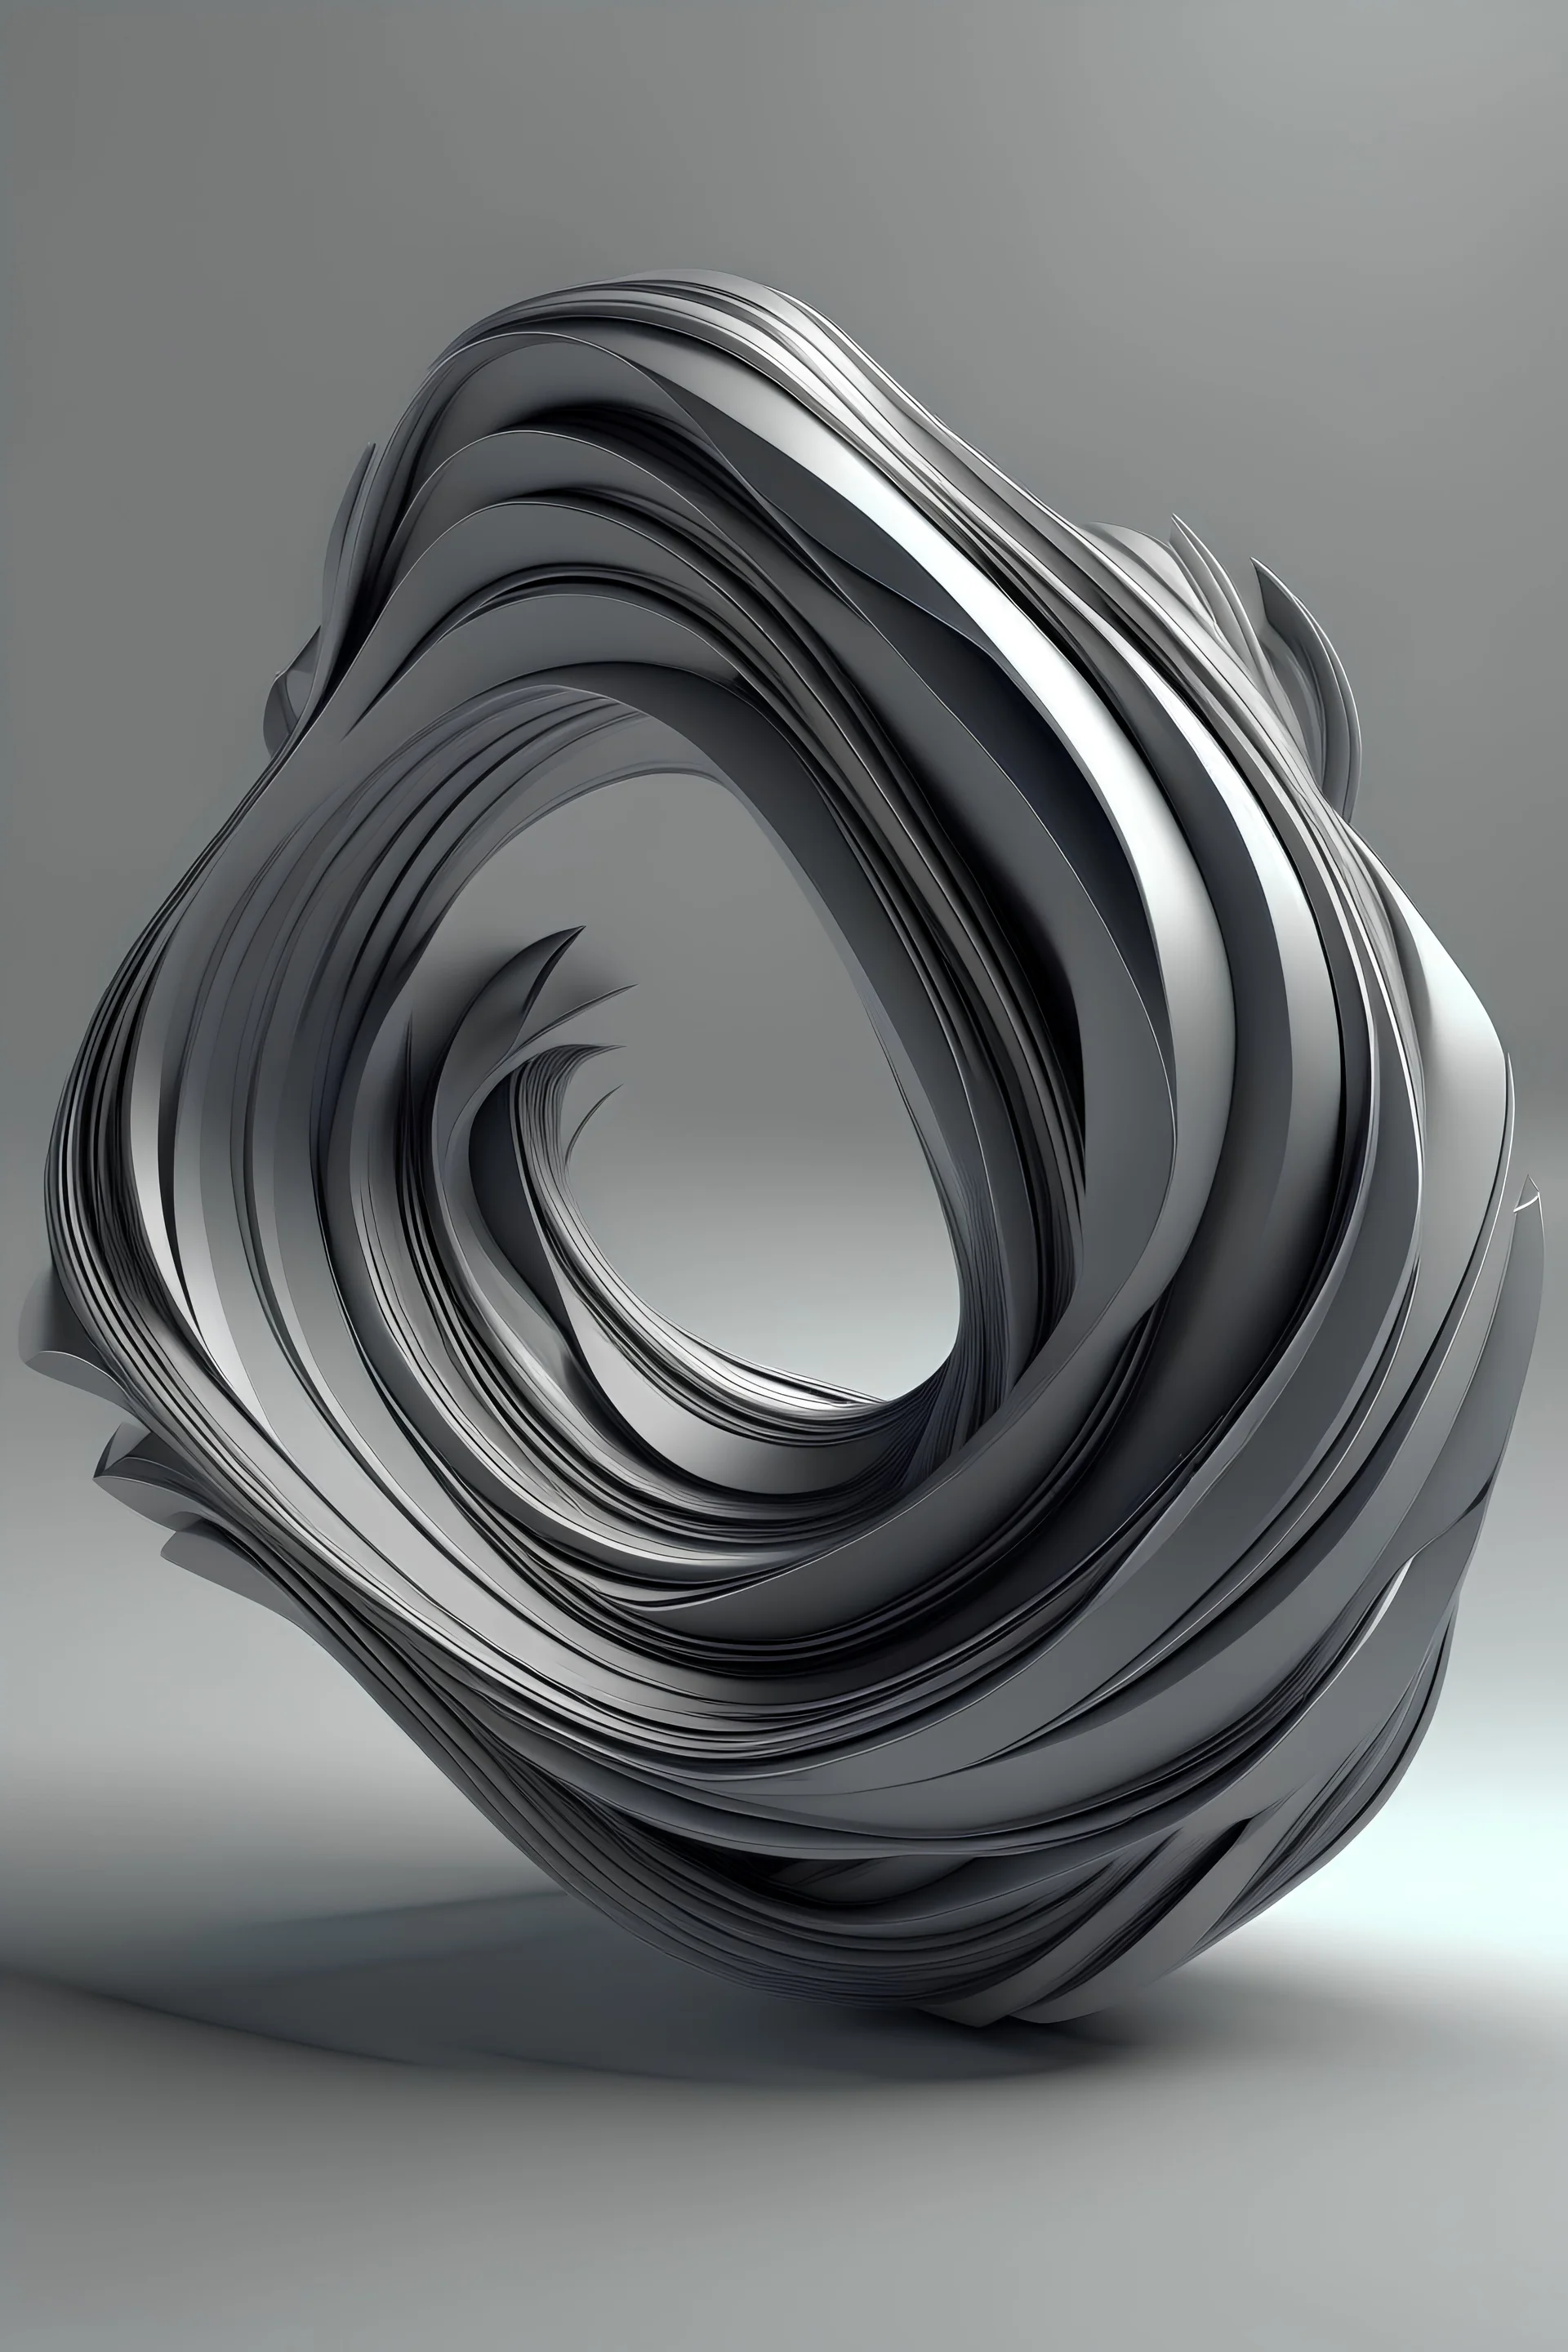 3d abstract space streamlined shape in grey colors